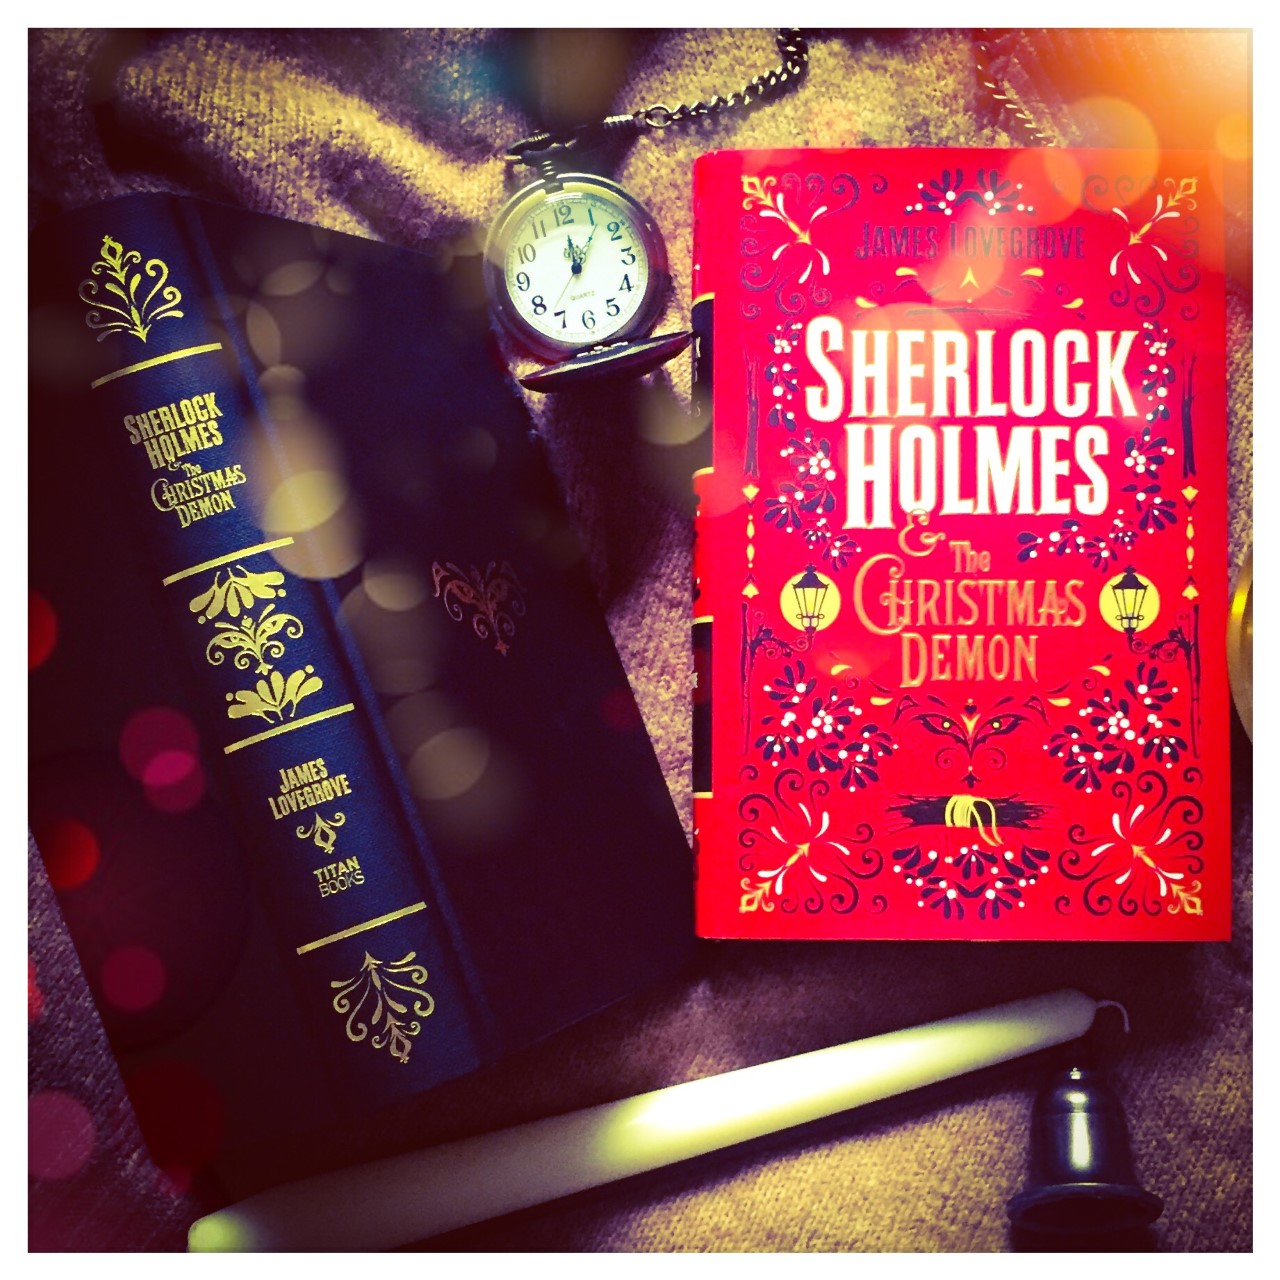 Download Mini Review Of Sherlock Holmes And The Christmas Demon By James Lovegrove With Thanks To Titan Books Books Tea And Me Yellowimages Mockups